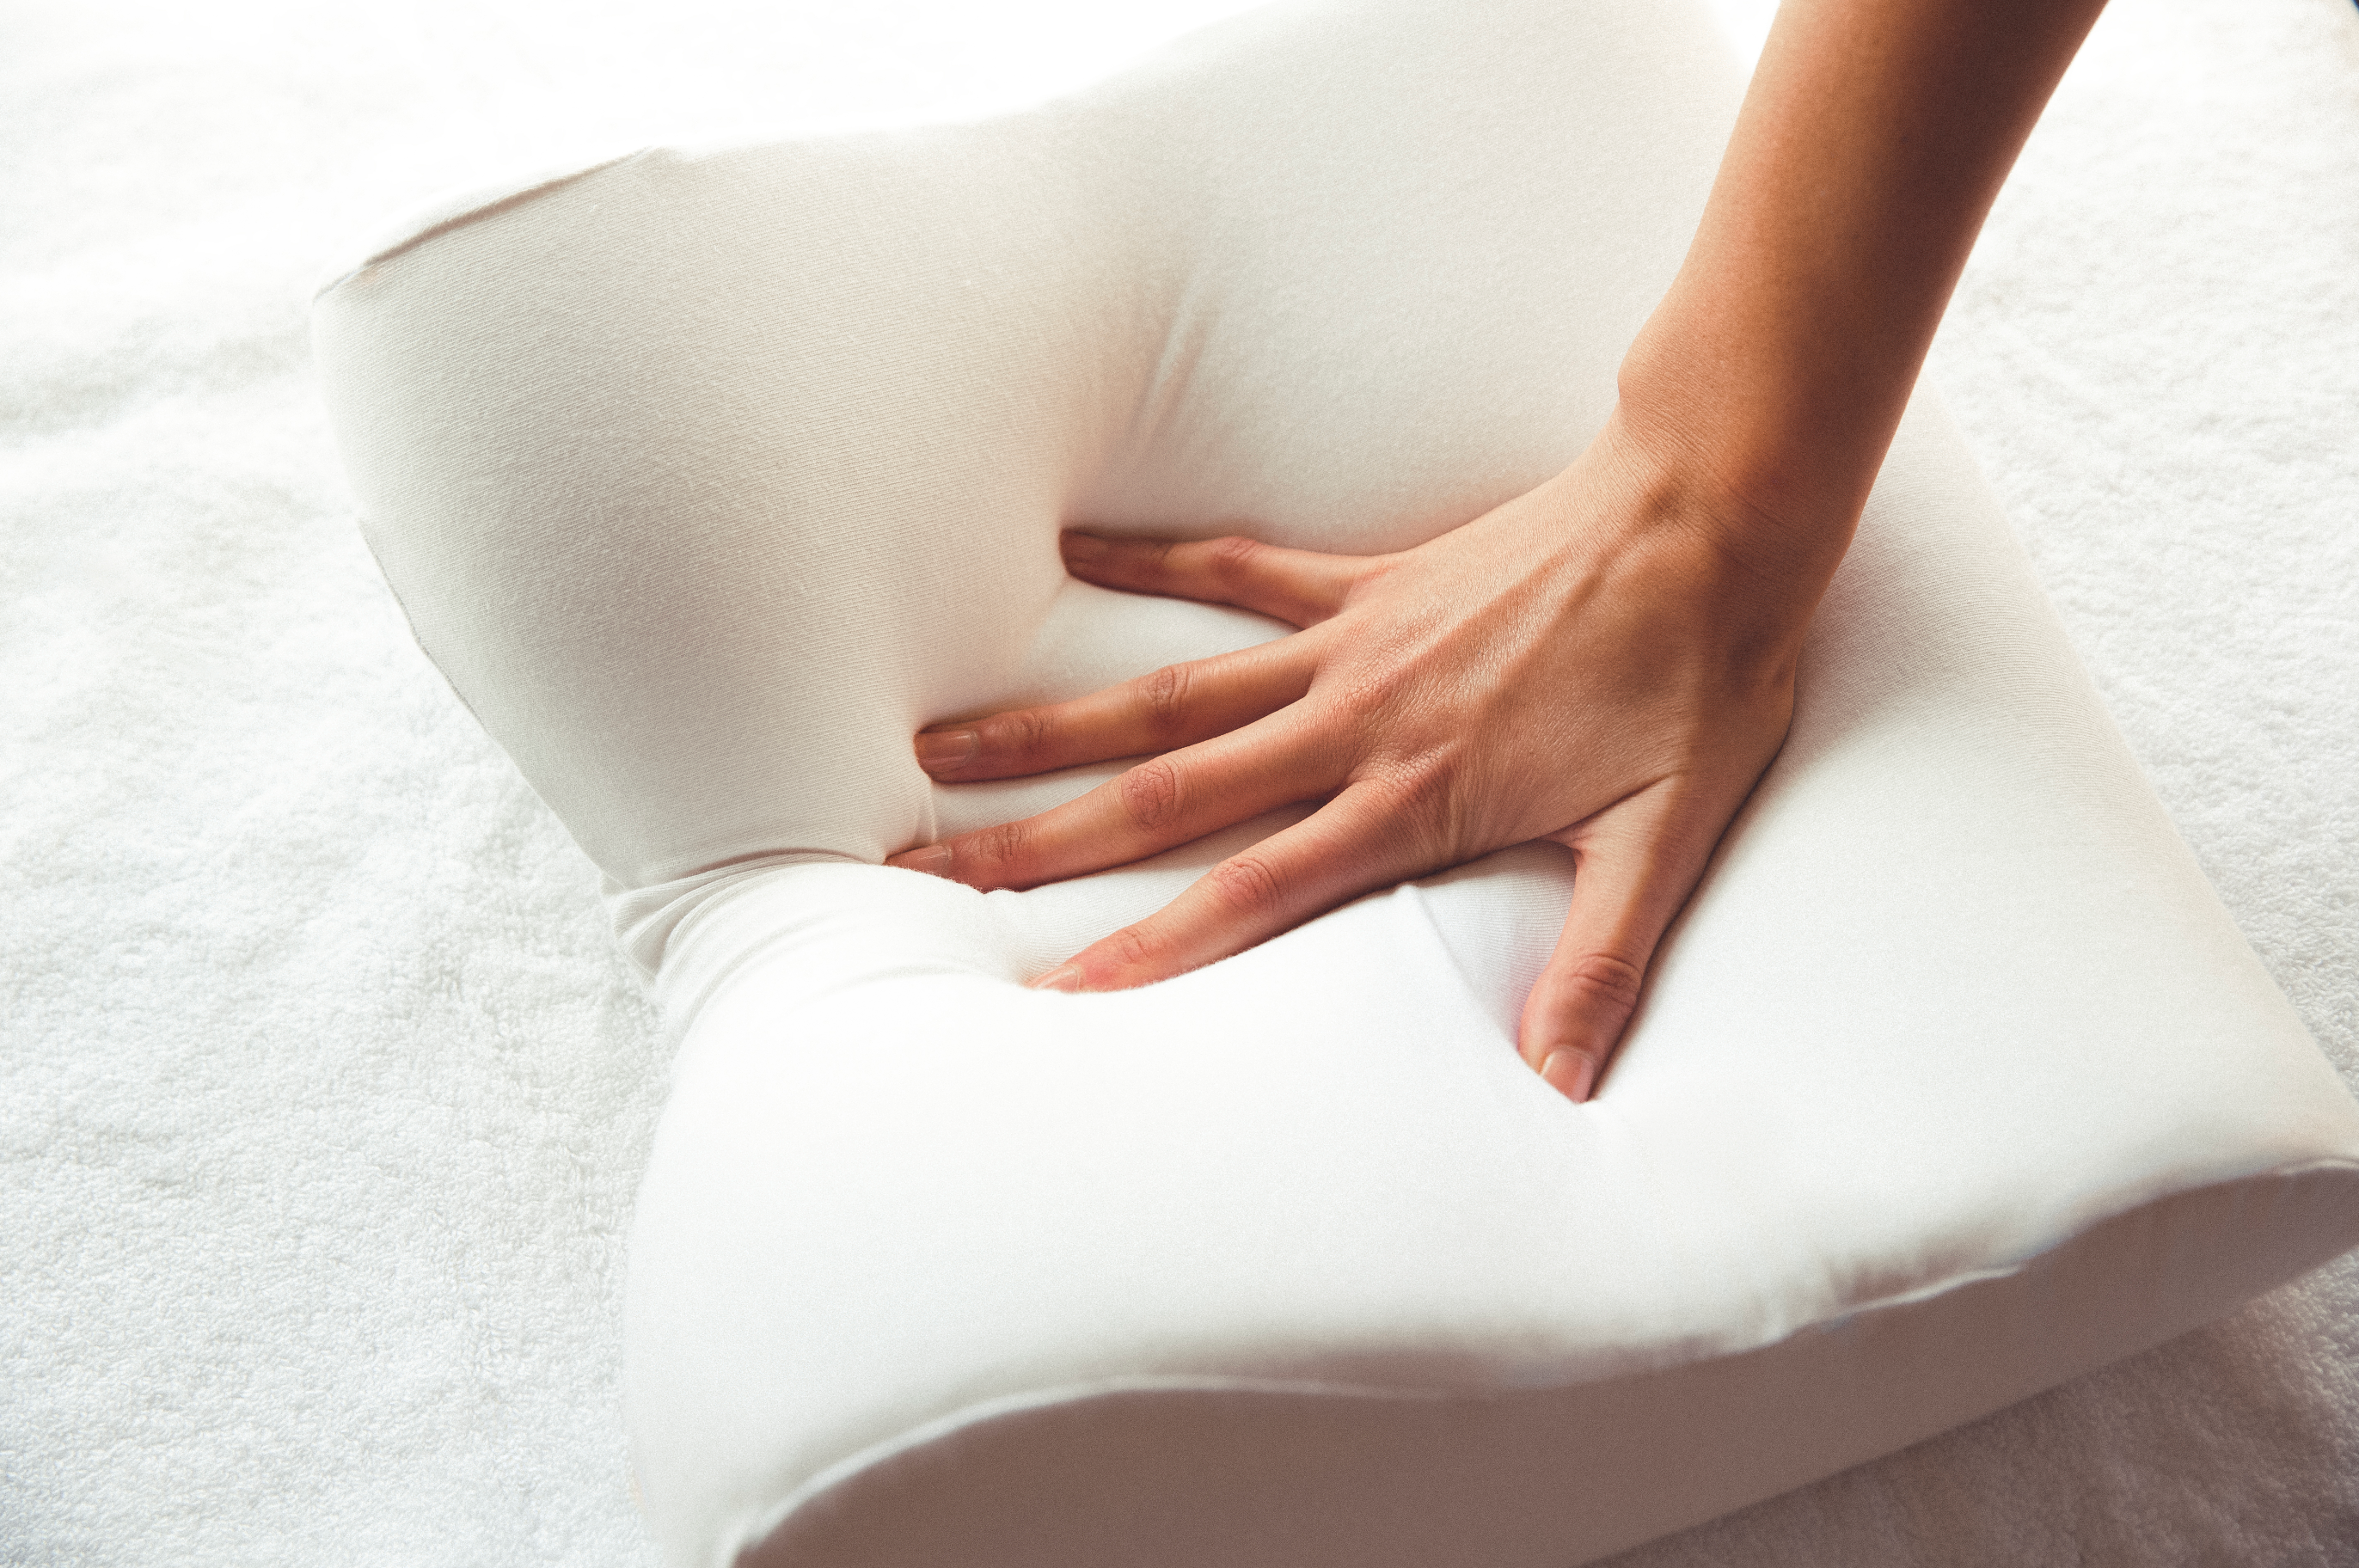 When should you replace your pillow?